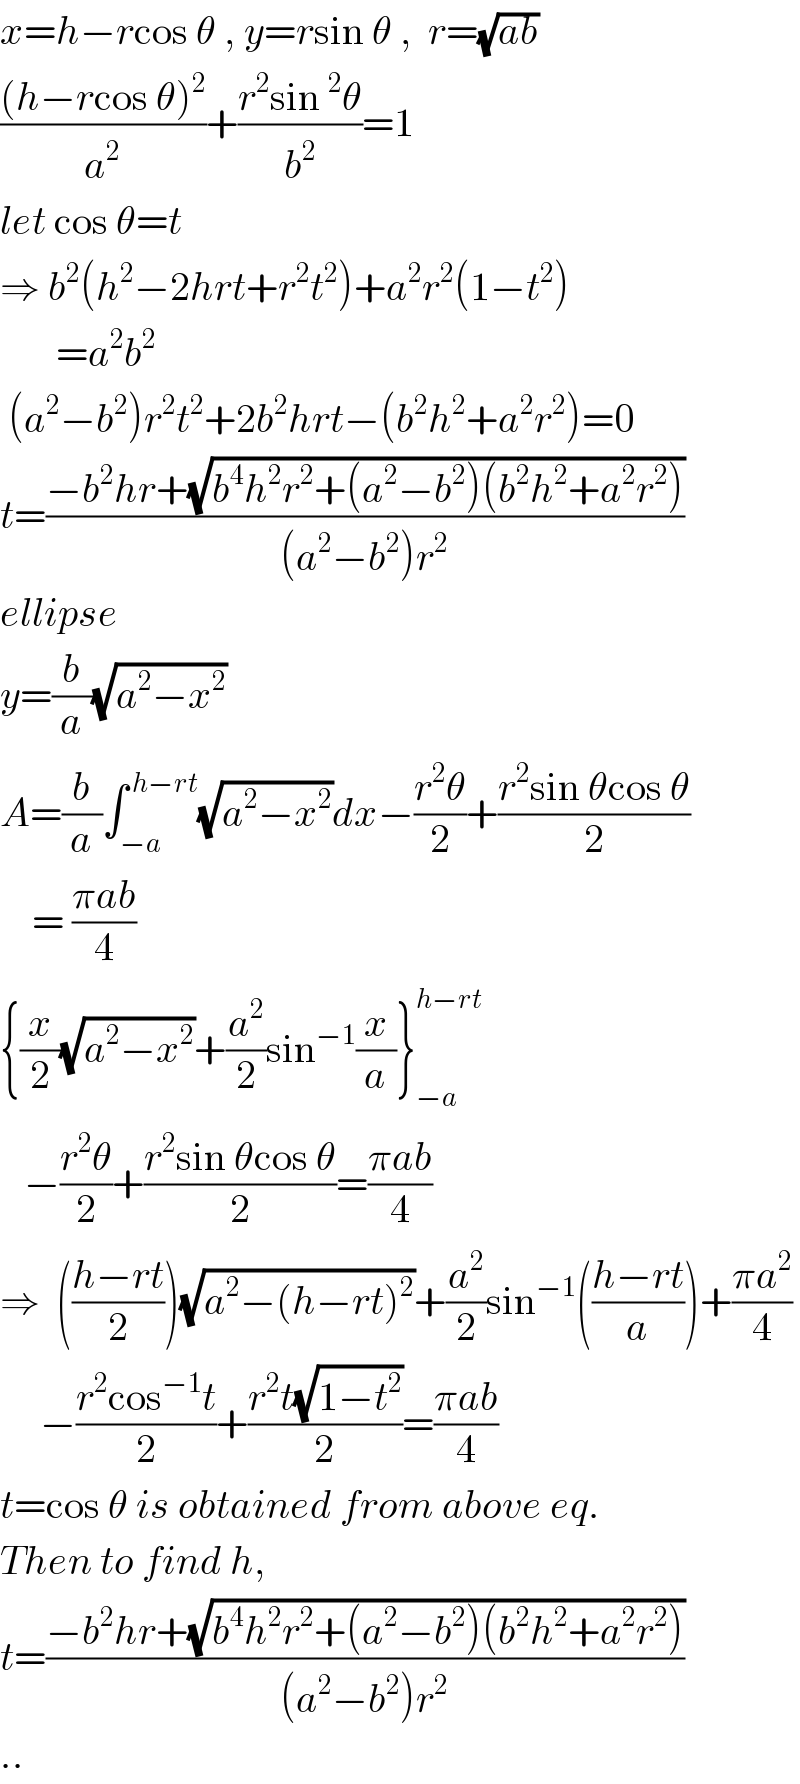 x=h−rcos θ , y=rsin θ ,  r=(√(ab))  (((h−rcos θ)^2 )/a^2 )+((r^2 sin^2 θ)/b^2 )=1  let cos θ=t  ⇒ b^2 (h^2 −2hrt+r^2 t^2 )+a^2 r^2 (1−t^2 )         =a^2 b^2    (a^2 −b^2 )r^2 t^2 +2b^2 hrt−(b^2 h^2 +a^2 r^2 )=0  t=((−b^2 hr+(√(b^4 h^2 r^2 +(a^2 −b^2 )(b^2 h^2 +a^2 r^2 ))))/((a^2 −b^2 )r^2 ))  ellipse  y=(b/a)(√(a^2 −x^2 ))  A=(b/a)∫_(−a) ^( h−rt) (√(a^2 −x^2 ))dx−((r^2 θ)/2)+((r^2 sin θcos θ)/2)      = ((πab)/4)  {(x/2)(√(a^2 −x^2 ))+(a^2 /2)sin^(−1) (x/a)}_(−a) ^(h−rt)      −((r^2 θ)/2)+((r^2 sin θcos θ)/2)=((πab)/4)  ⇒  (((h−rt)/2))(√(a^2 −(h−rt)^2 ))+(a^2 /2)sin^(−1) (((h−rt)/a))+((πa^2 )/4)       −((r^2 cos^(−1) t)/2)+((r^2 t(√(1−t^2 )))/2)=((πab)/4)  t=cos θ is obtained from above eq.  Then to find h,  t=((−b^2 hr+(√(b^4 h^2 r^2 +(a^2 −b^2 )(b^2 h^2 +a^2 r^2 ))))/((a^2 −b^2 )r^2 ))  ..  